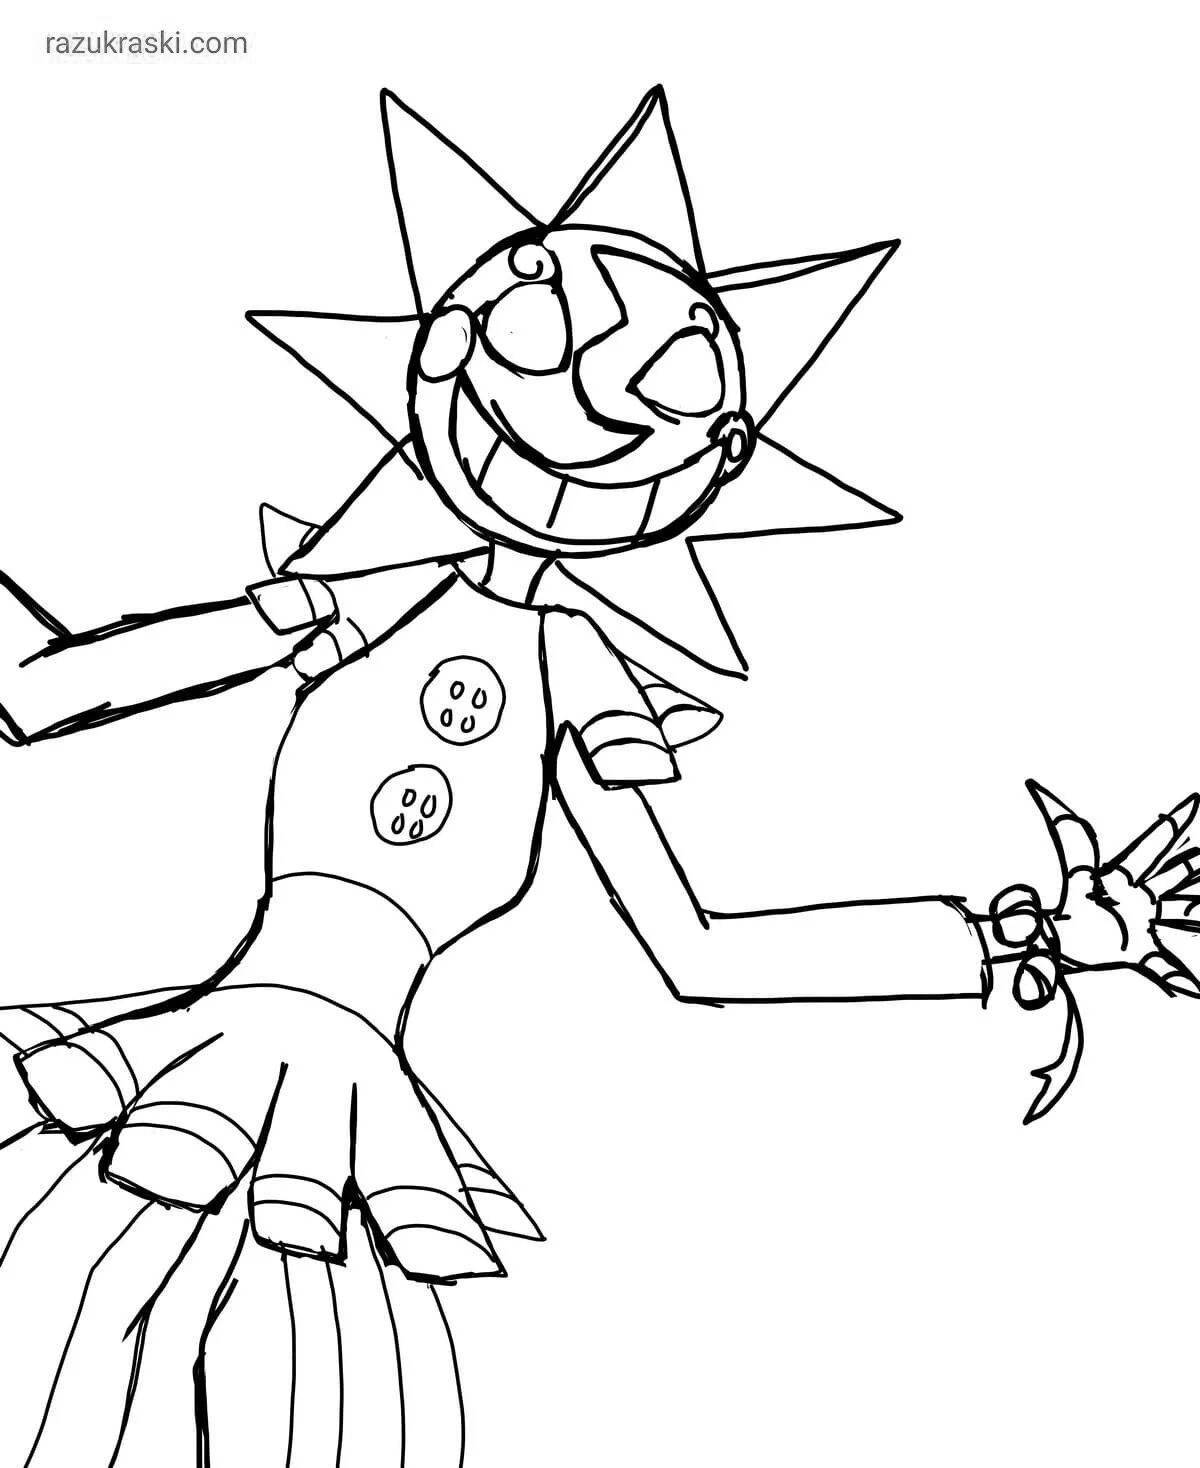 Cute fnaf 9 sun and moon coloring book